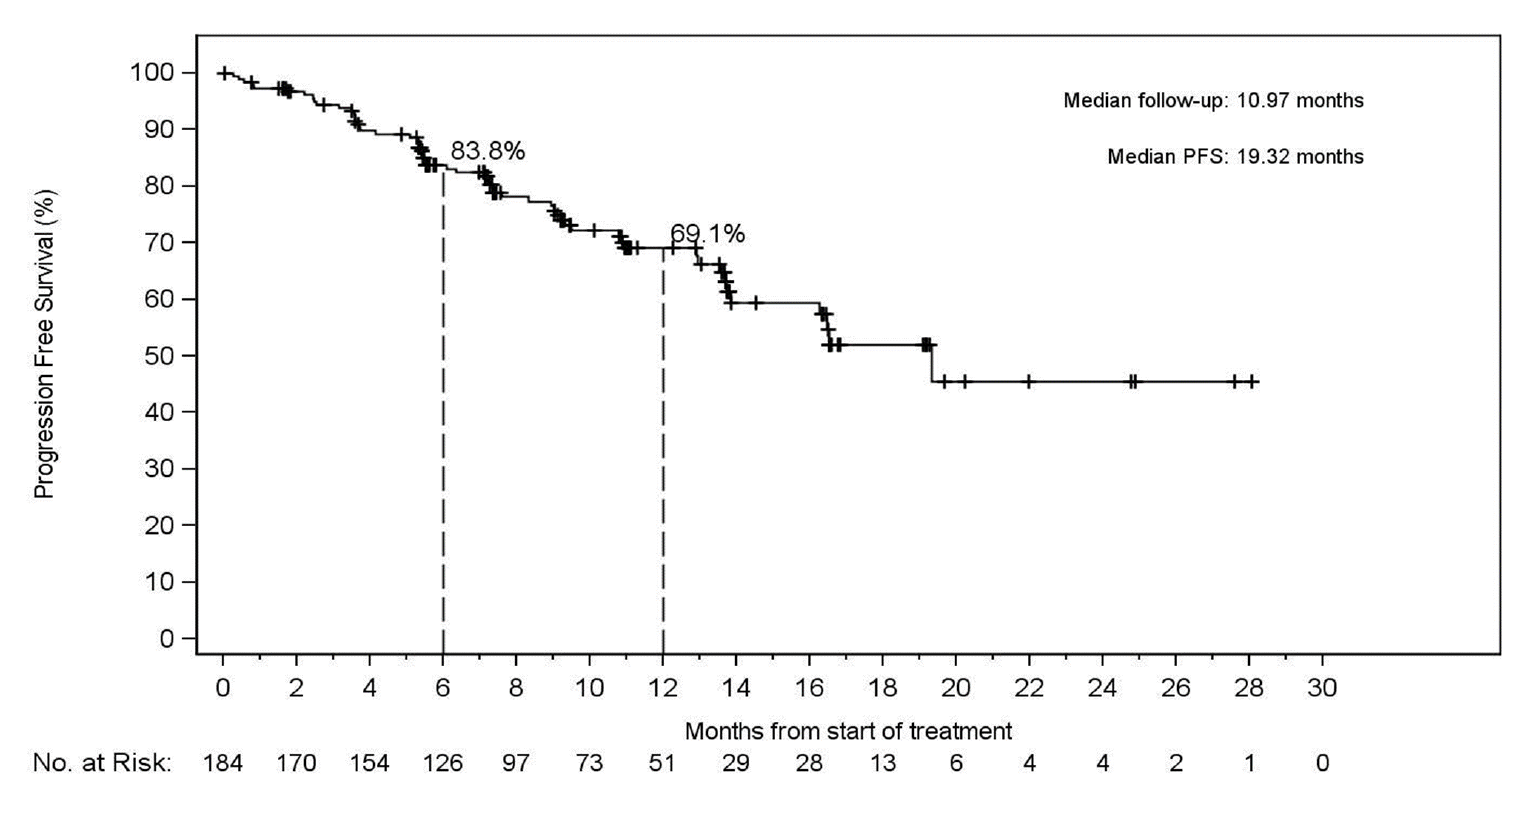 In this Kaplan–Meier plot of progression-free survival (PFS) in the integrated analysis set (RET fusion-positive non–small cell lung cancer with prior platinum chemotherapy) based on the independent radiographic committee assessment, the number of at-risk patients receiving selpercatinib at 0, 2, 4, 6, 8, 12, 14, 16, 18, 20, 22, 24, 26, 28, and 30 months was 184, 170, 154, 126, 97, 73, 51, 29, 28, 13, 6, 4, 4, 2, 1, and 0, respectively. The median PFS was 19.32 months.